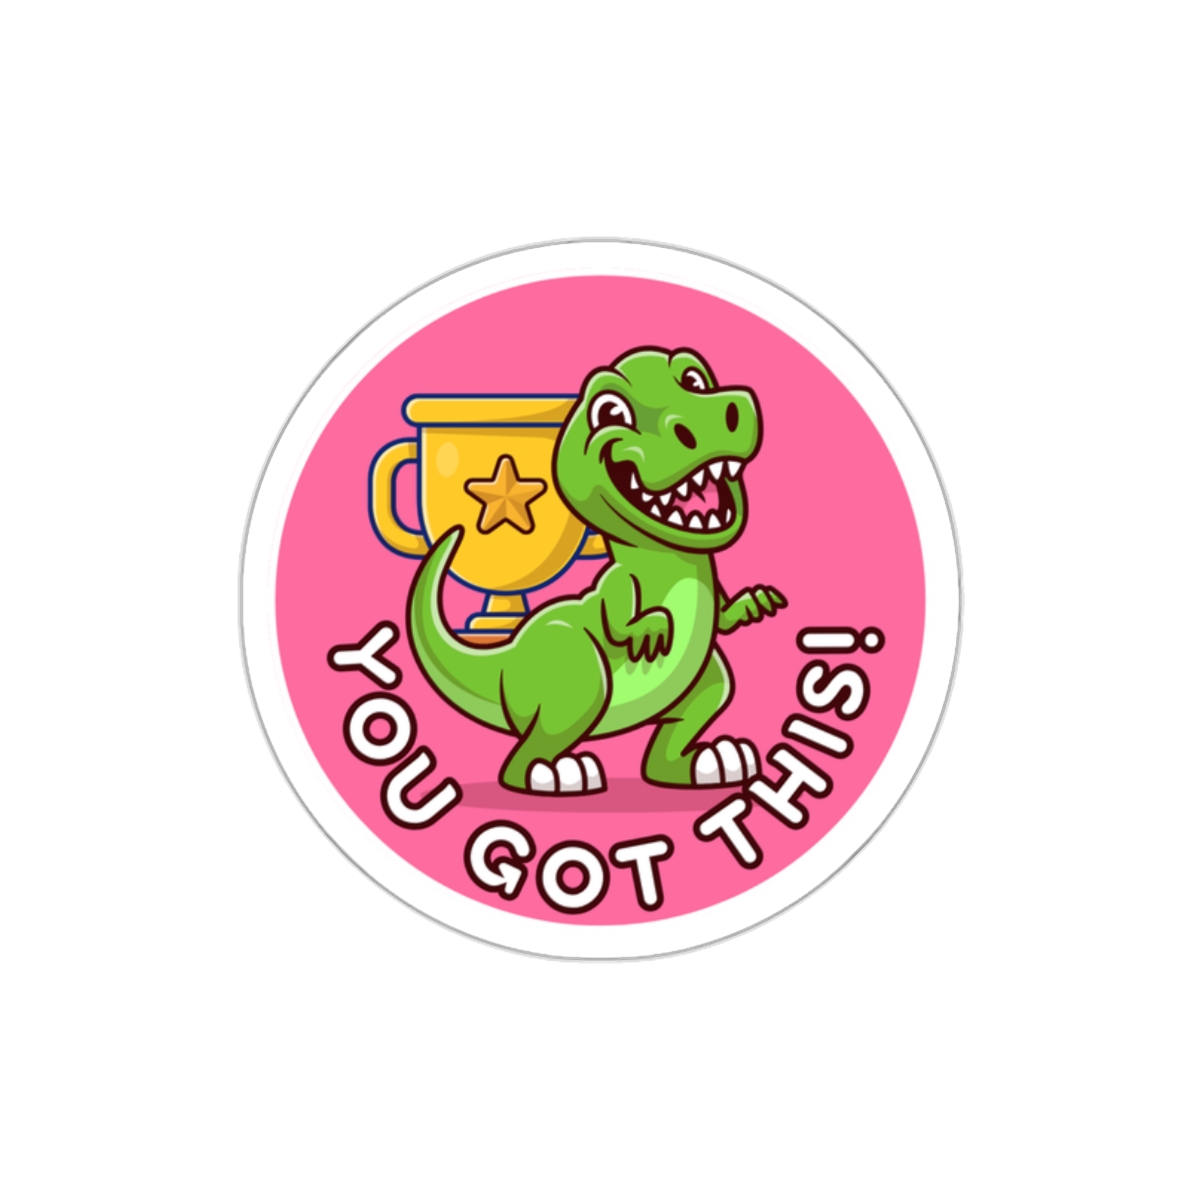 You Got this Sticker II Achievement sticker product thumbnail image